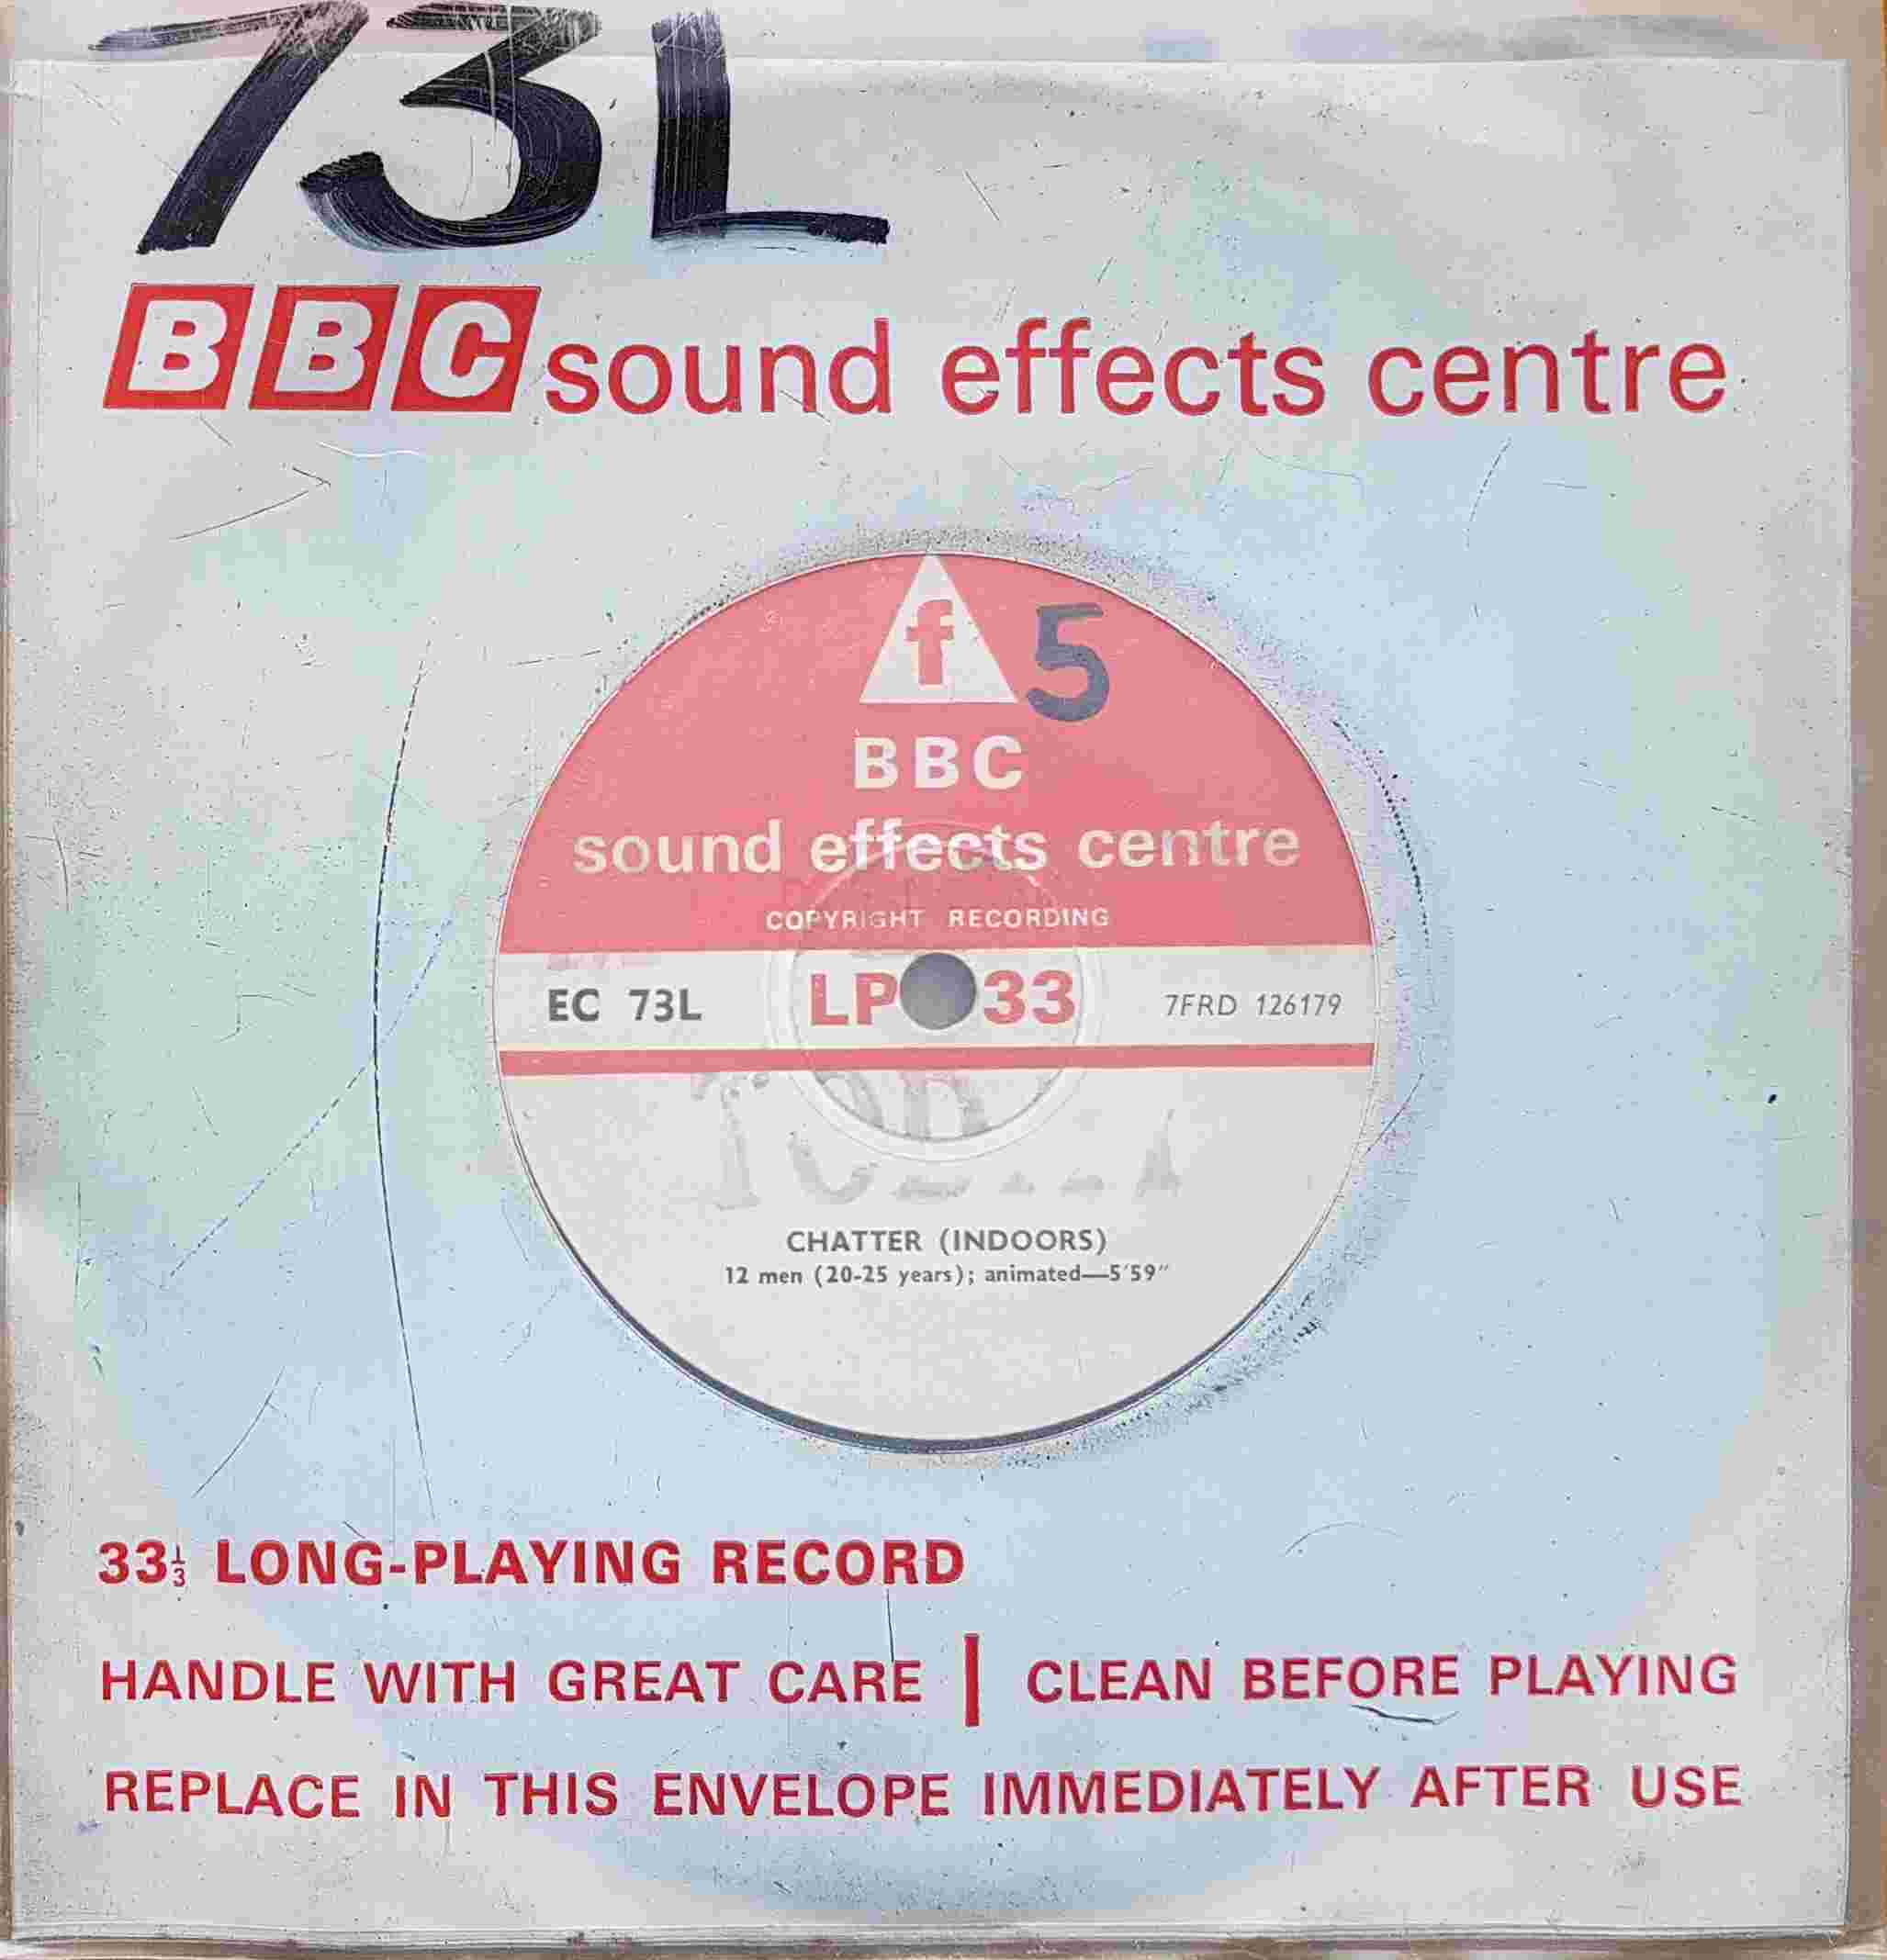 Picture of EC 73L Chatter - Indoors by artist Not registered from the BBC singles - Records and Tapes library